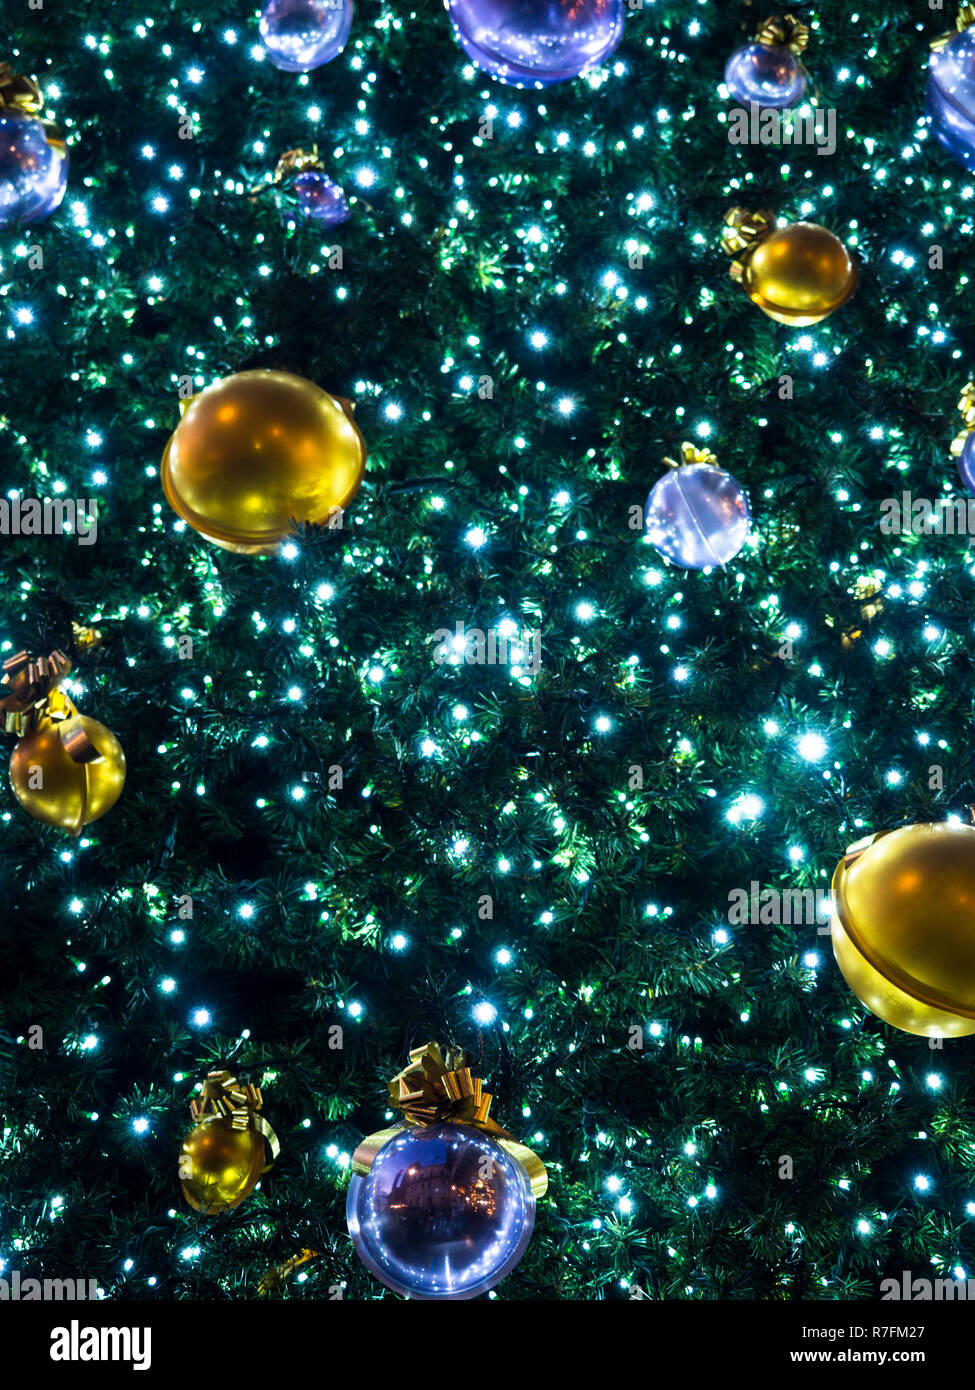 Christmas background formed from the detail of an illuminated Christmas tree. Stock Photo